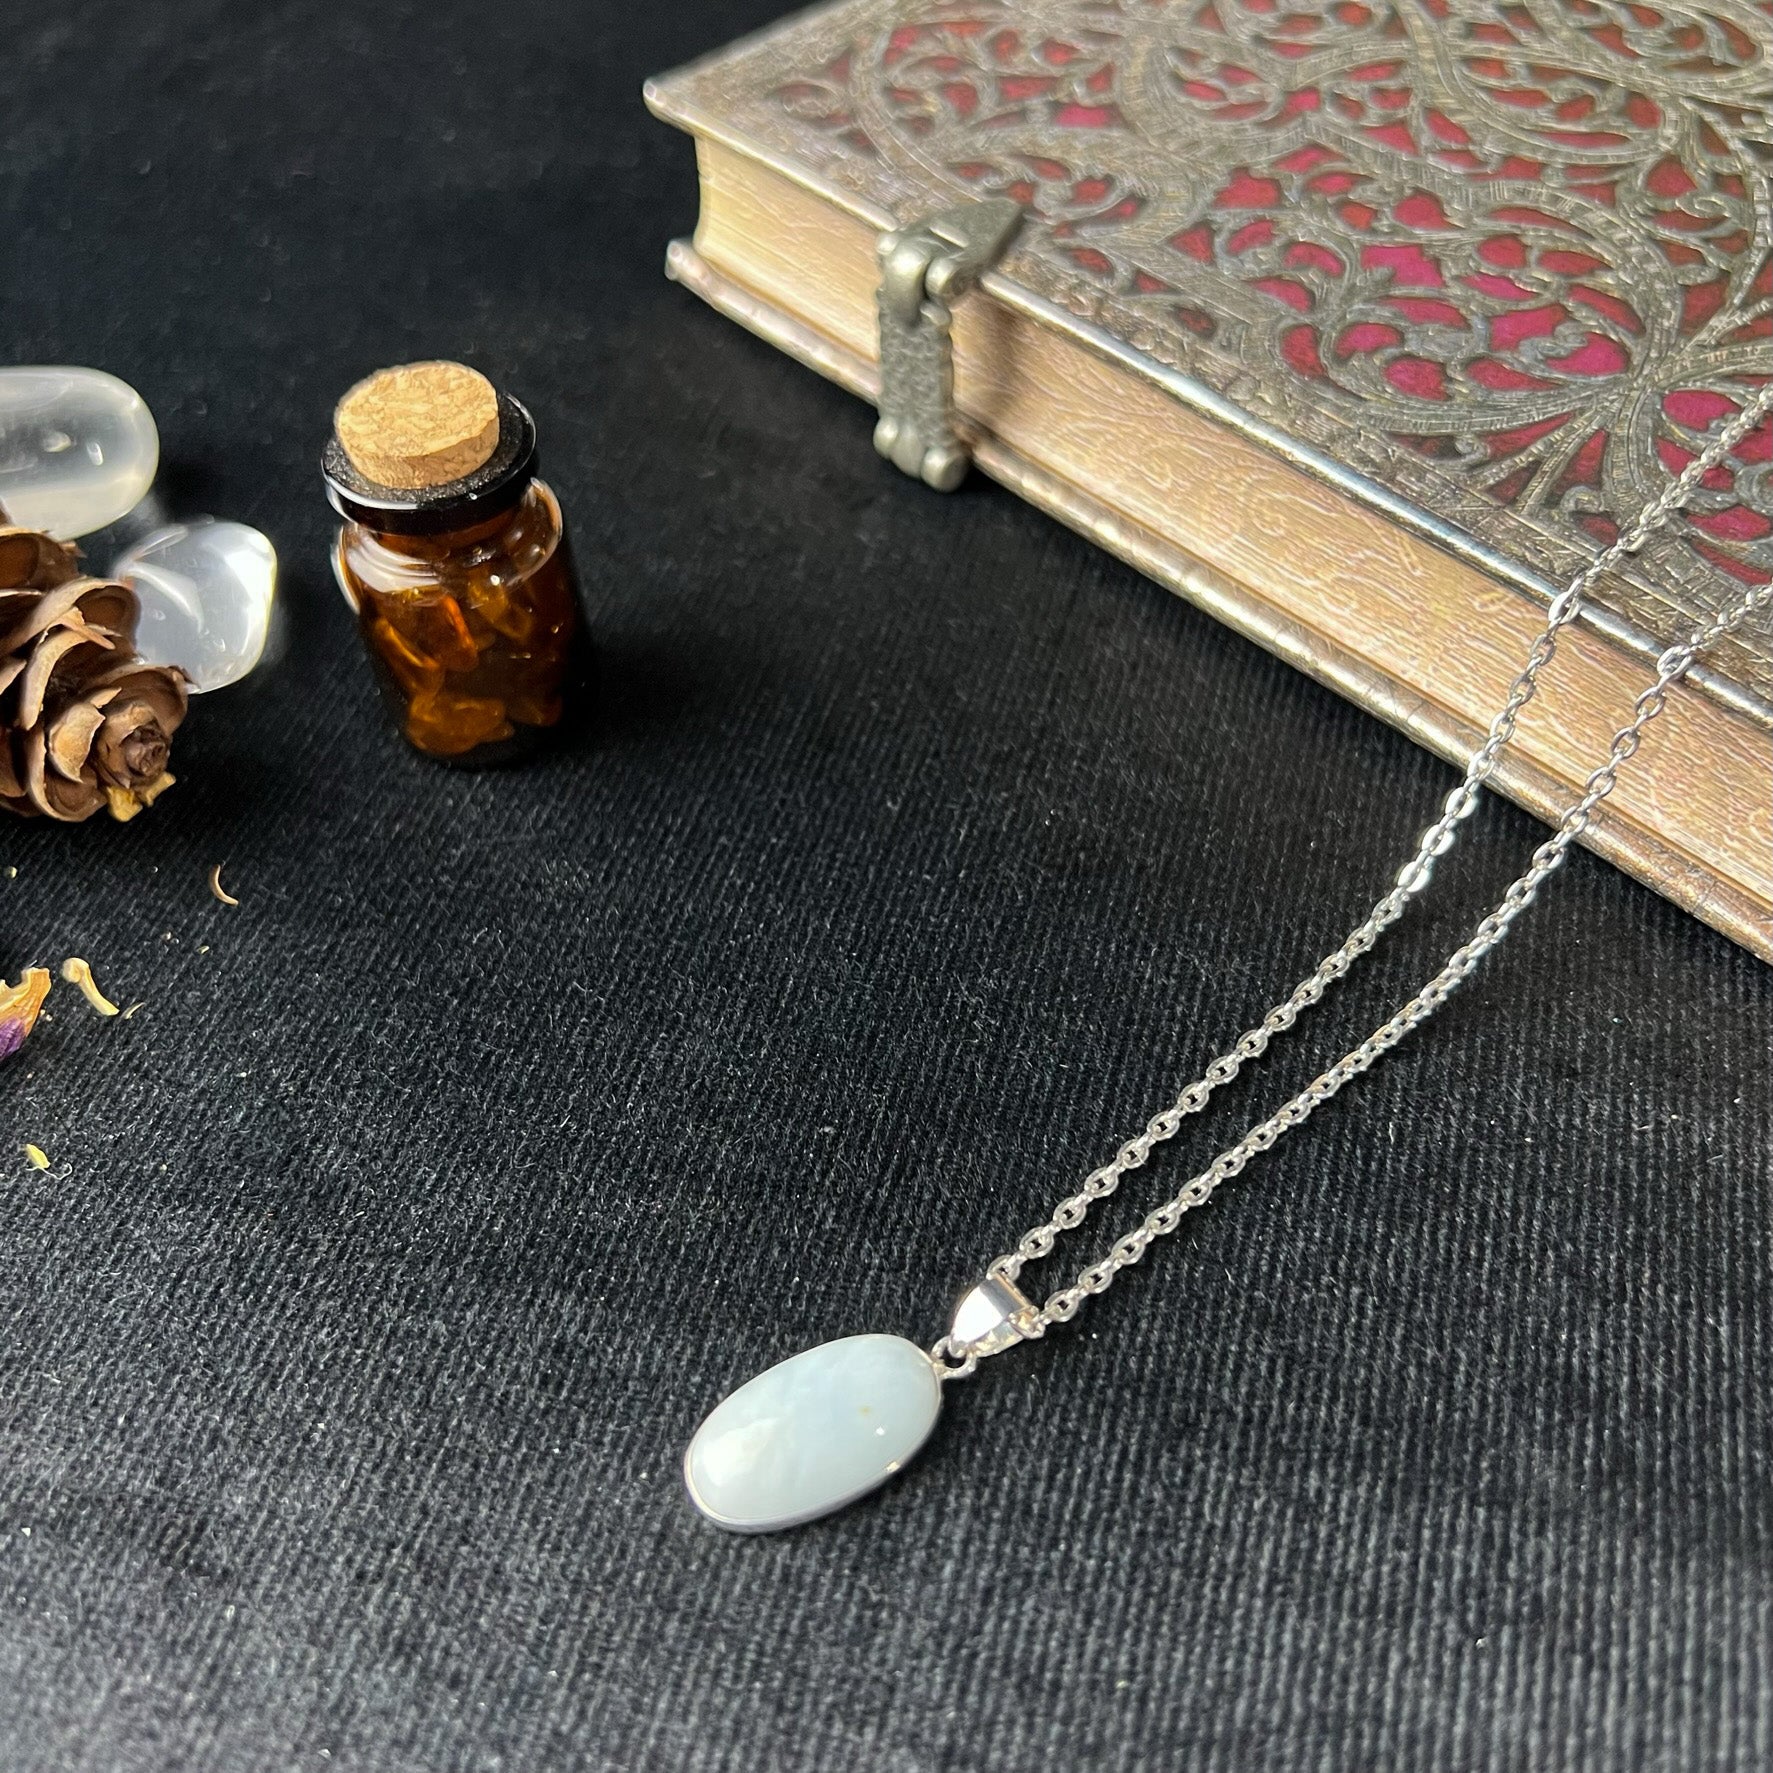 Aquamarine pendant necklace lithotherapy jewelry - The French Witch shop